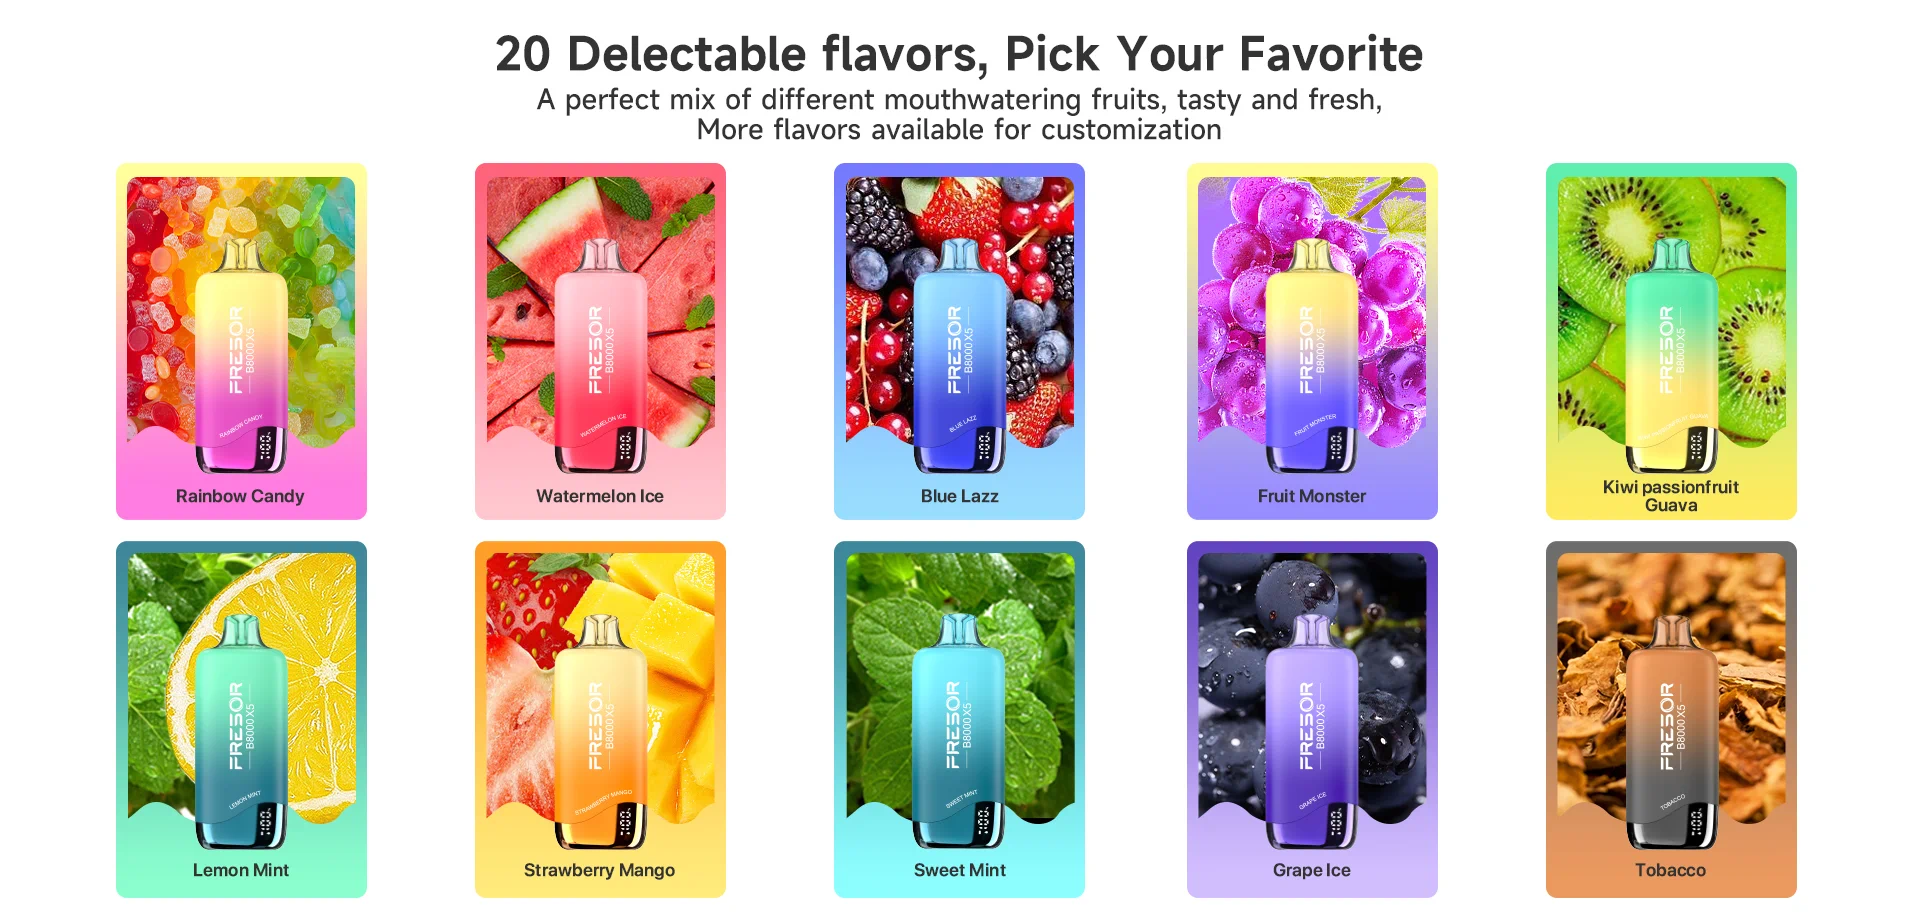 20 Delectable flavors, Pick Your Favorite A perfect mix of different mouthwatering fruits, tasty and fresh, More flavors available for customization